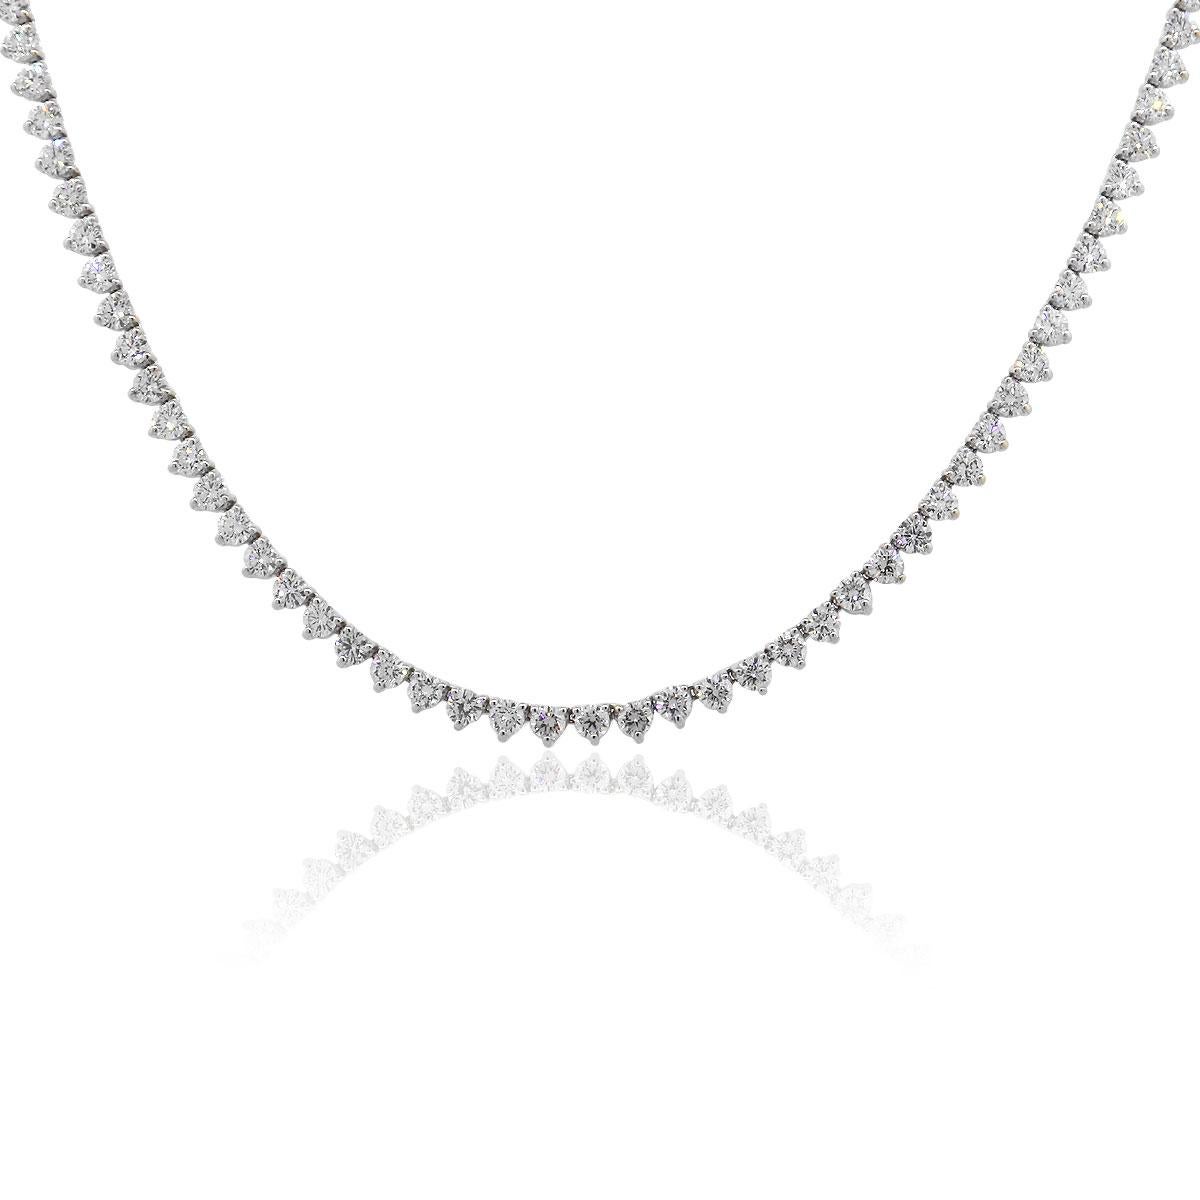 Material: 14k White Gold
Diamond Details: Approx. 11ctw of round cut diamonds. Diamonds are G/H in color and SI in clarity
Measurements: Necklace measures 15.5″ in length.
Fastening: Tongue in box clasp with safety latch
Item Weight: 11.6g